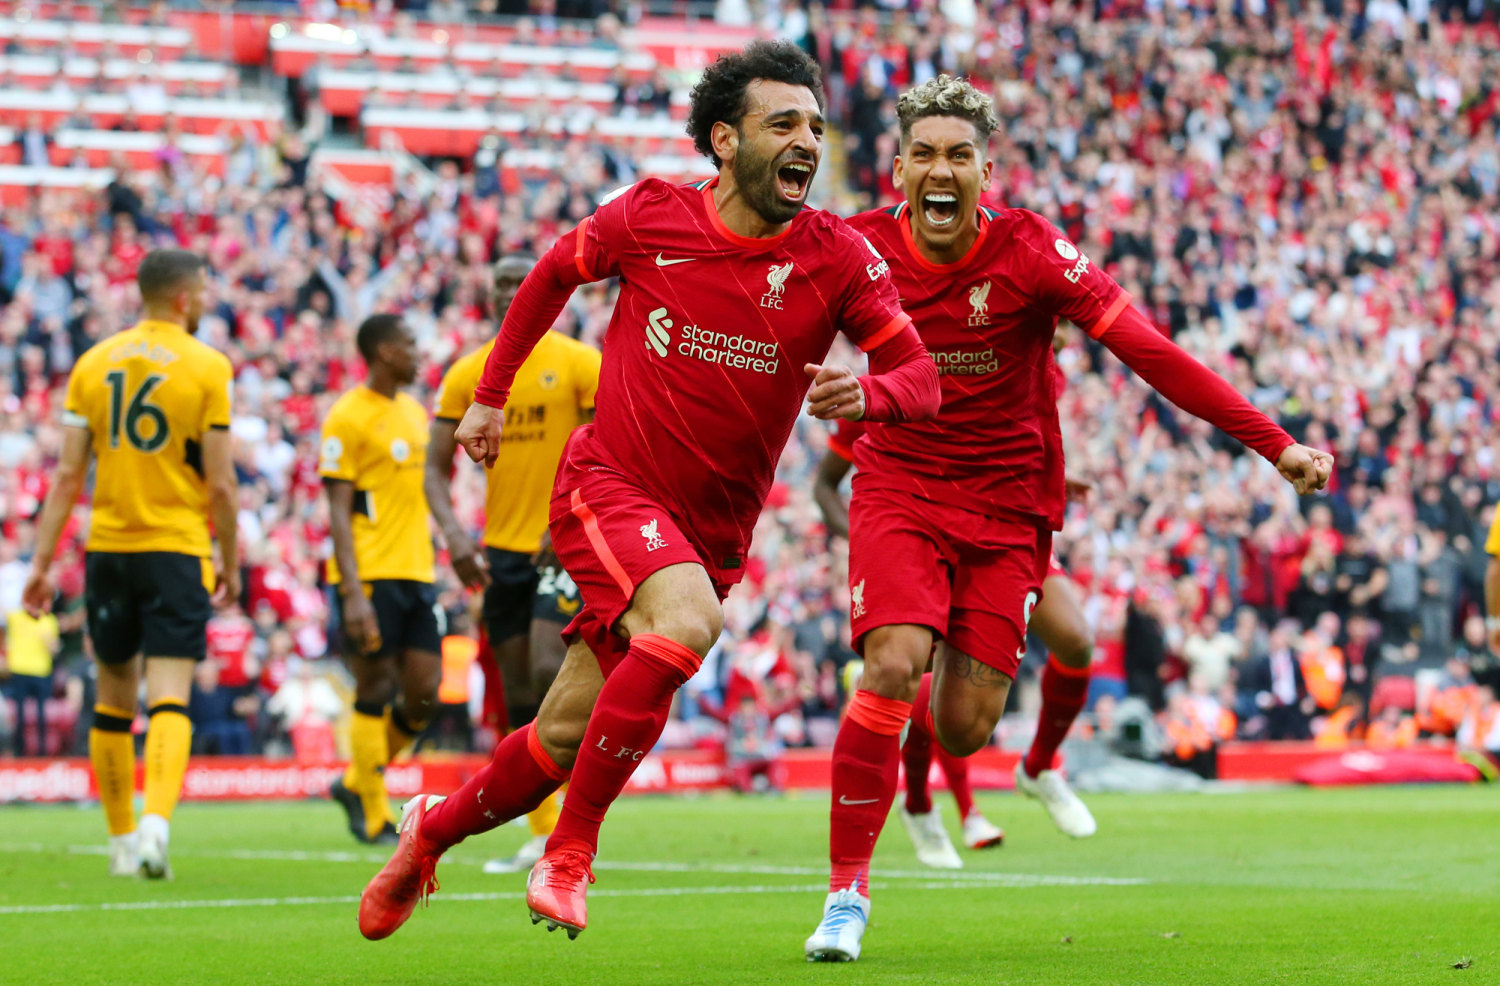 Will Champions League final with Liverpool and Real Madrid continue English soccer success?